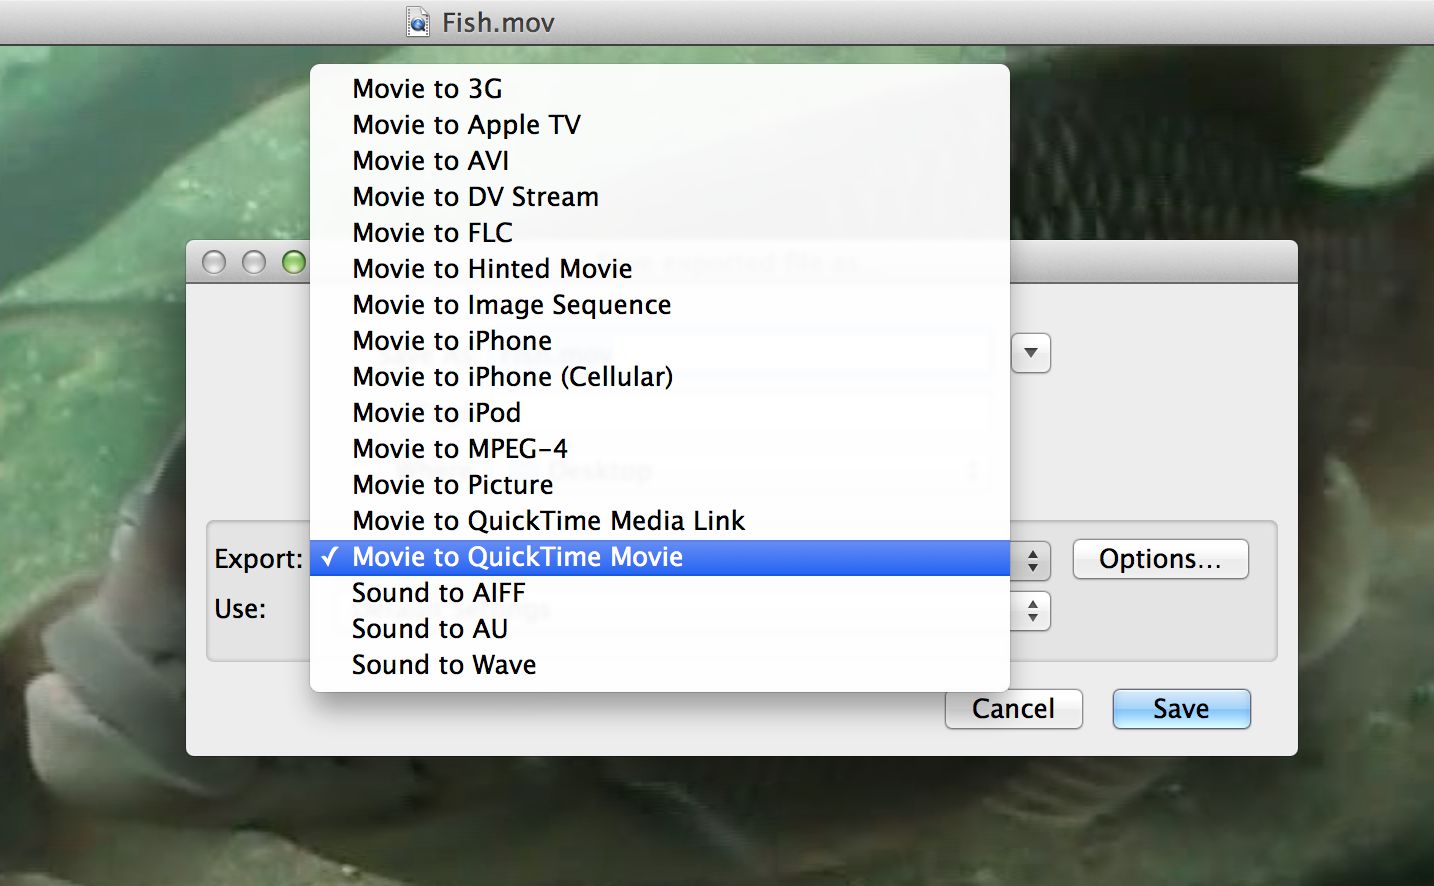 quicktime 7 player for mac osx